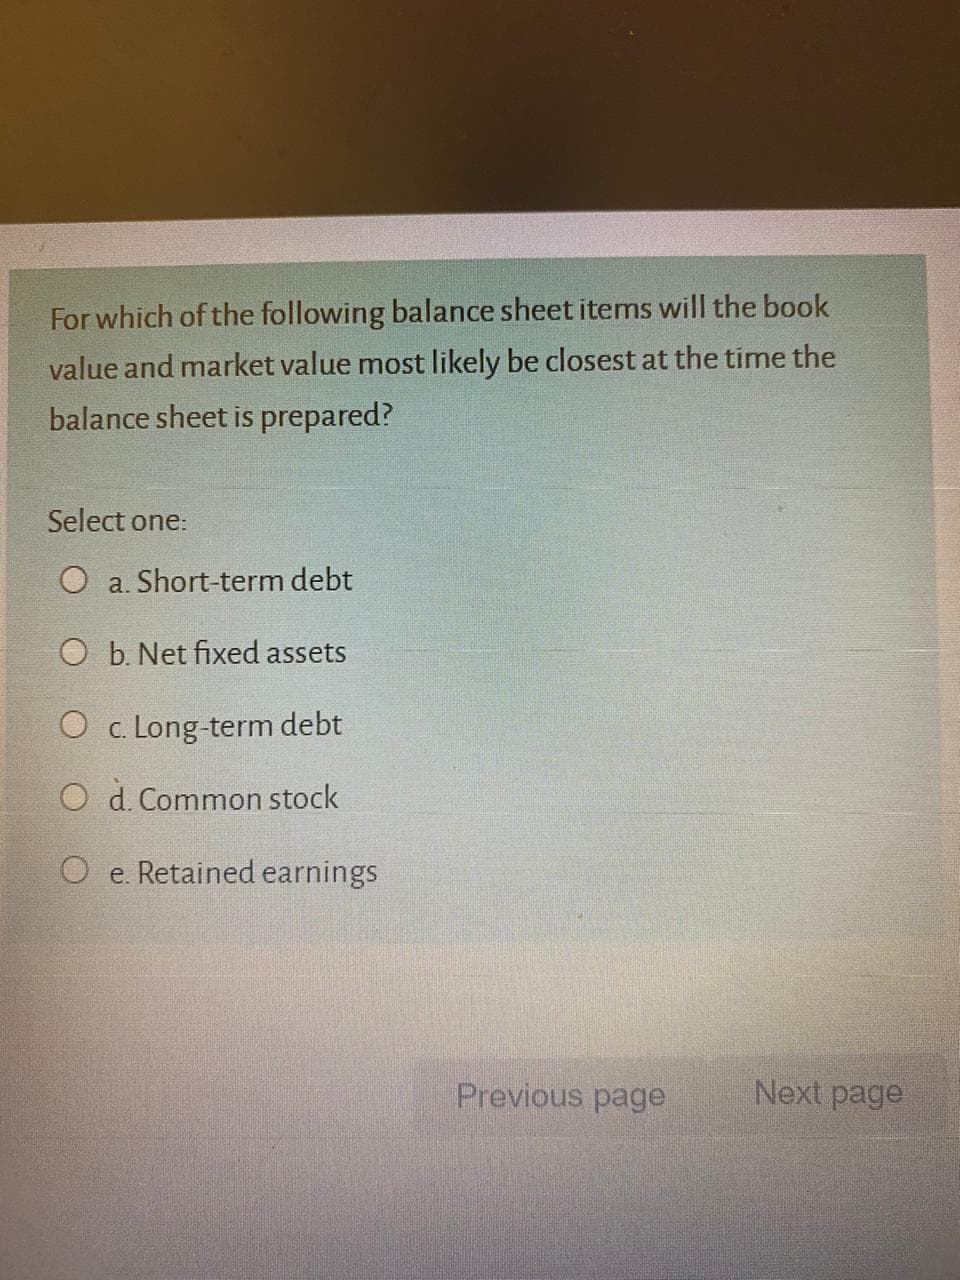 For which of the following balance sheet items will the book
value and market value most likely be closest at the time the
balance sheet is prepared?
Select one:
O a. Short-term debt
O b. Net fixed assets
O c. Long-term debt
O d. Common stock
O e. Retained earnings
